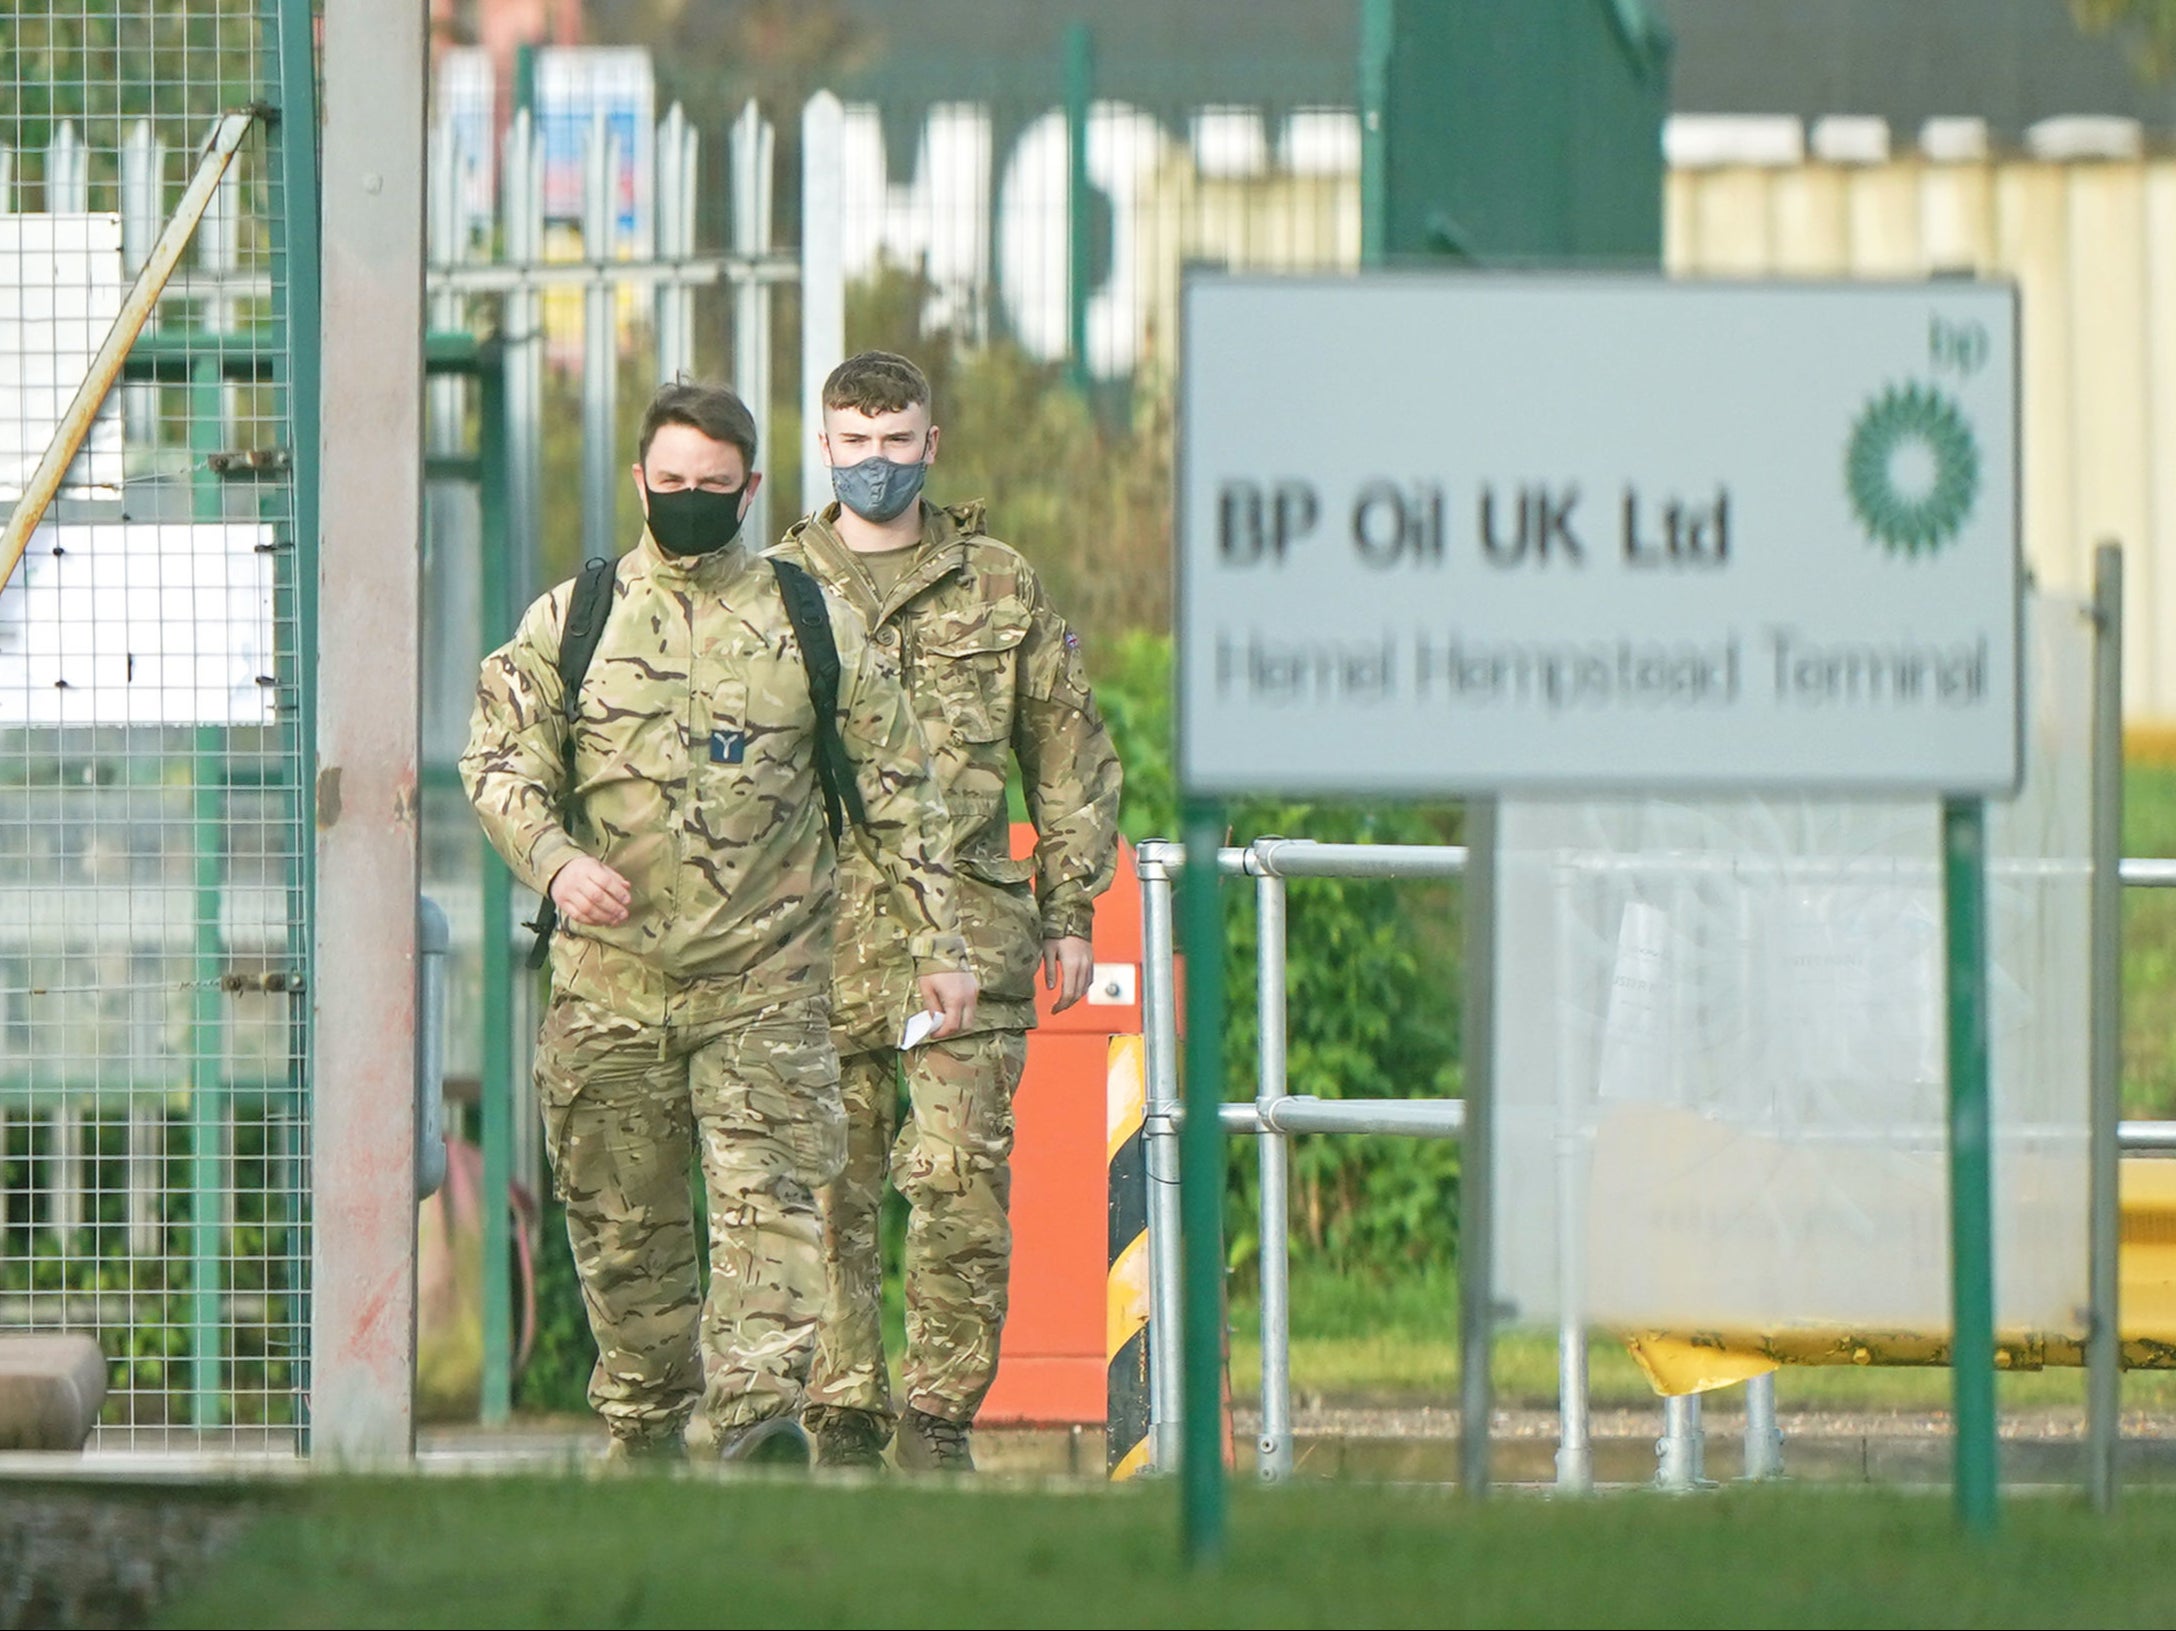 Members of the armed forces at Buncefield oil depot